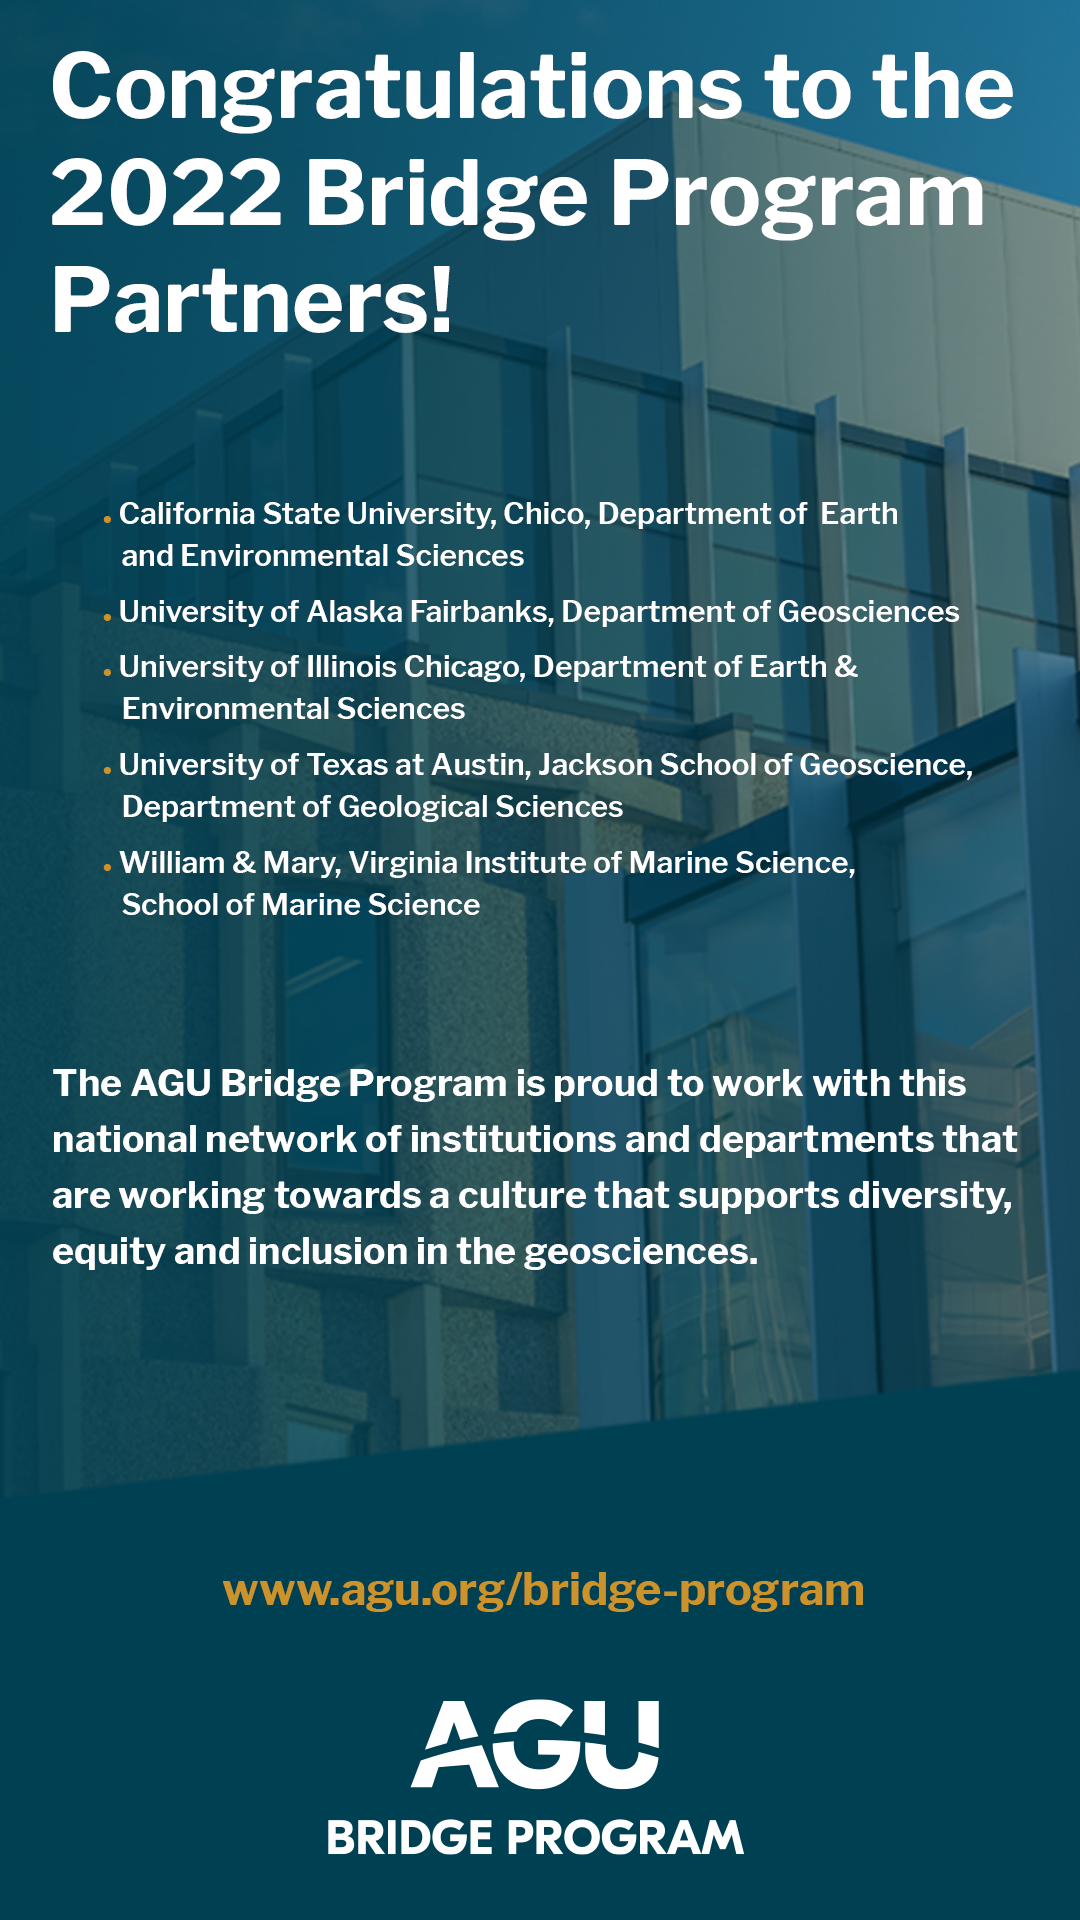 Congratulations to the 2022 Bridge Program Partners! The AGU Bridge Program is an asset to geoscience departments seeking to promote equity within their graduate programs and within the larger geoscience community. By working together, we can create a more welcoming environment in the Earth and space sciences for everyone. Congratulations to the five departments selected for partnership in 2022: California State University, Chico, Department of Earth and Environmental Sciences; University of Alaska Fairbanks, Department of Geosciences; University of Illinois Chicago, Department of Earth & Environmental Sciences; University of Texas at Austin, Jackson School of Geoscience, Department of Geological Sciences; and William & Mary, Virginia Institute of Marine Science, School of Marine Science. 